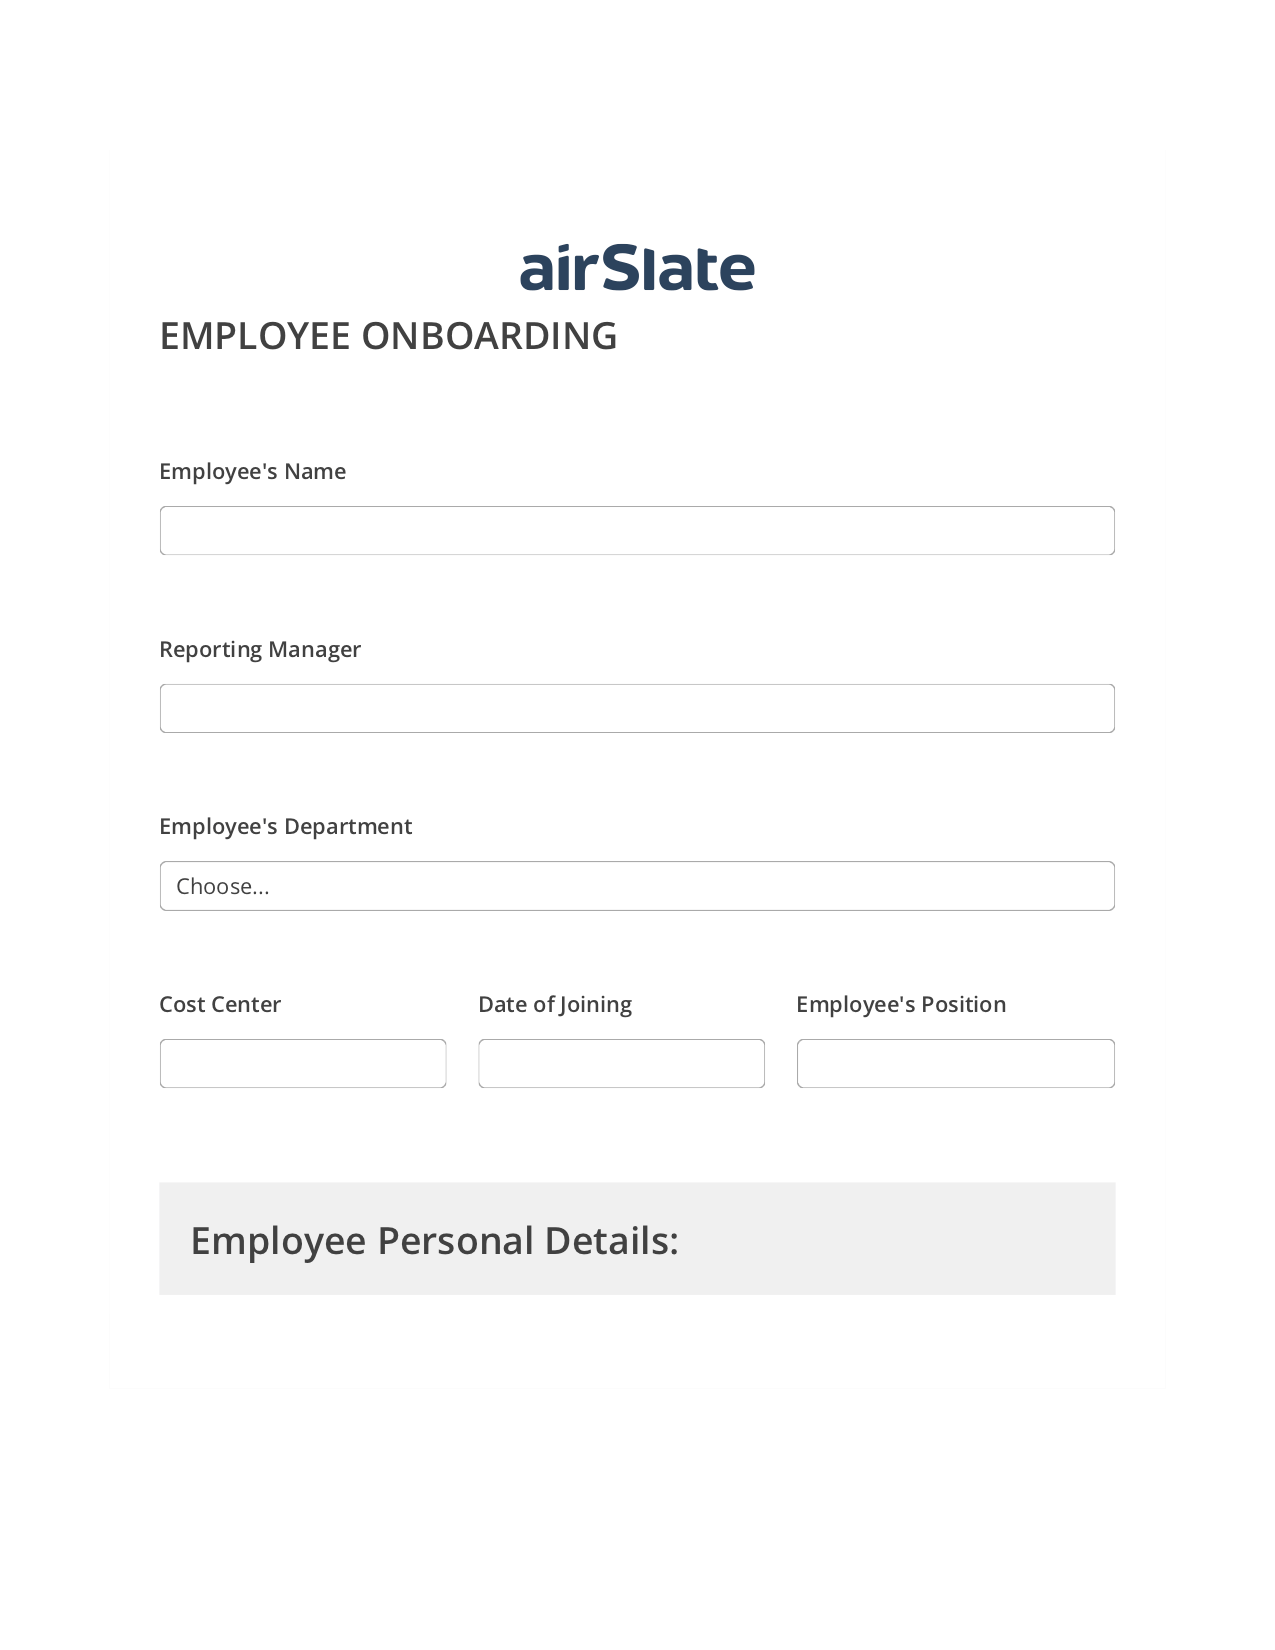 Employee Onboarding Workflow Pre-fill from CSV File Bot, Google Sheet Two-Way Binding Bot, Archive to SharePoint Folder Bot